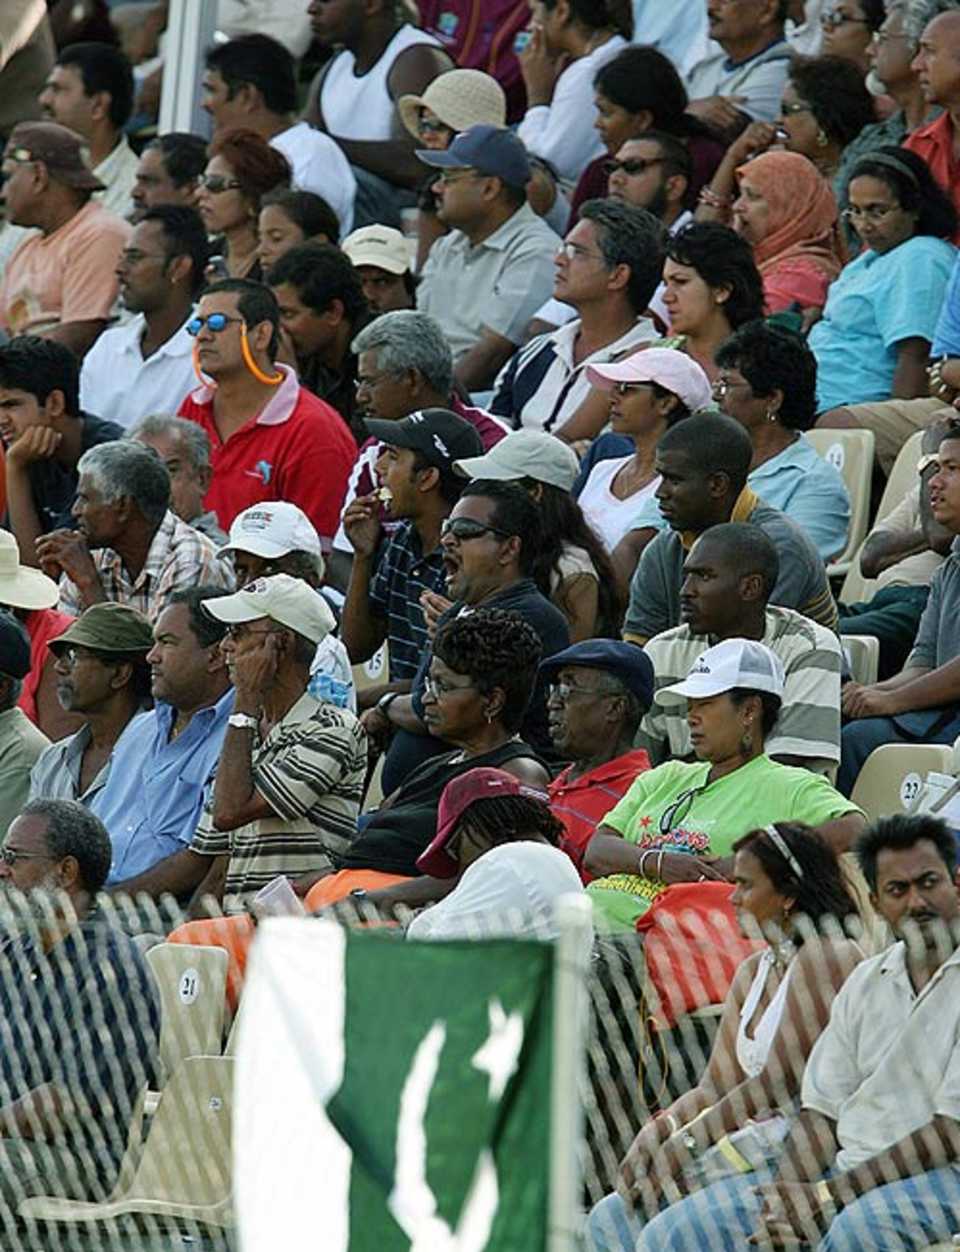 Cricket fans watch Pakistan batting during a warm-up match against South Africa